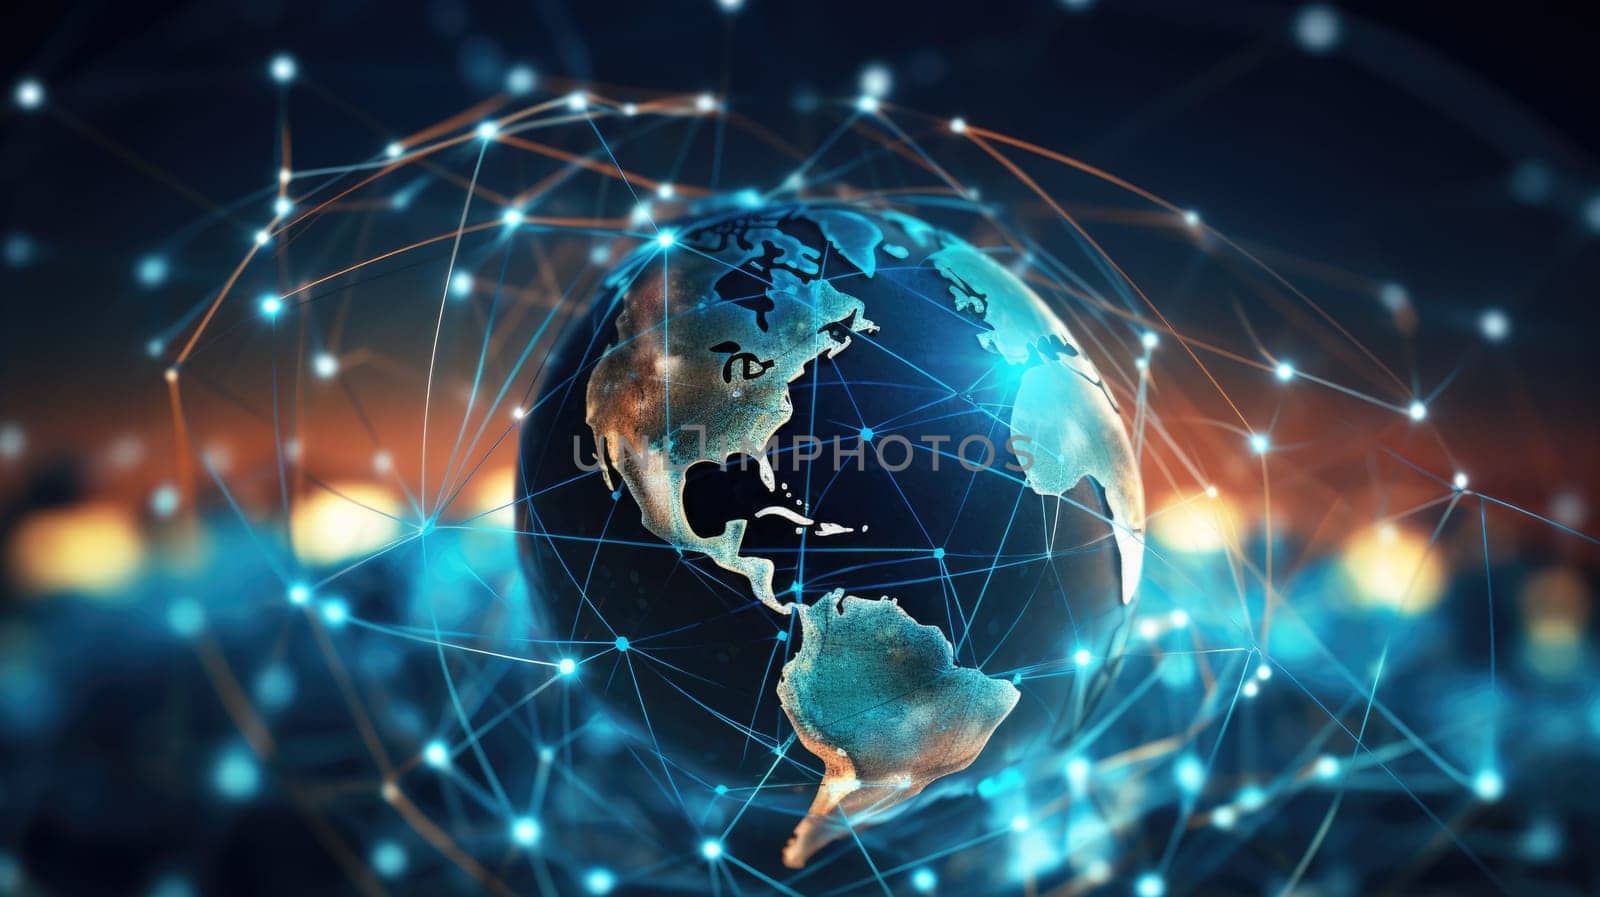 Communication technology with connections around globe Earth showing concept of Internet, IoT, cyberspace, global business, innovation, big data science, digital finance, blockchain.